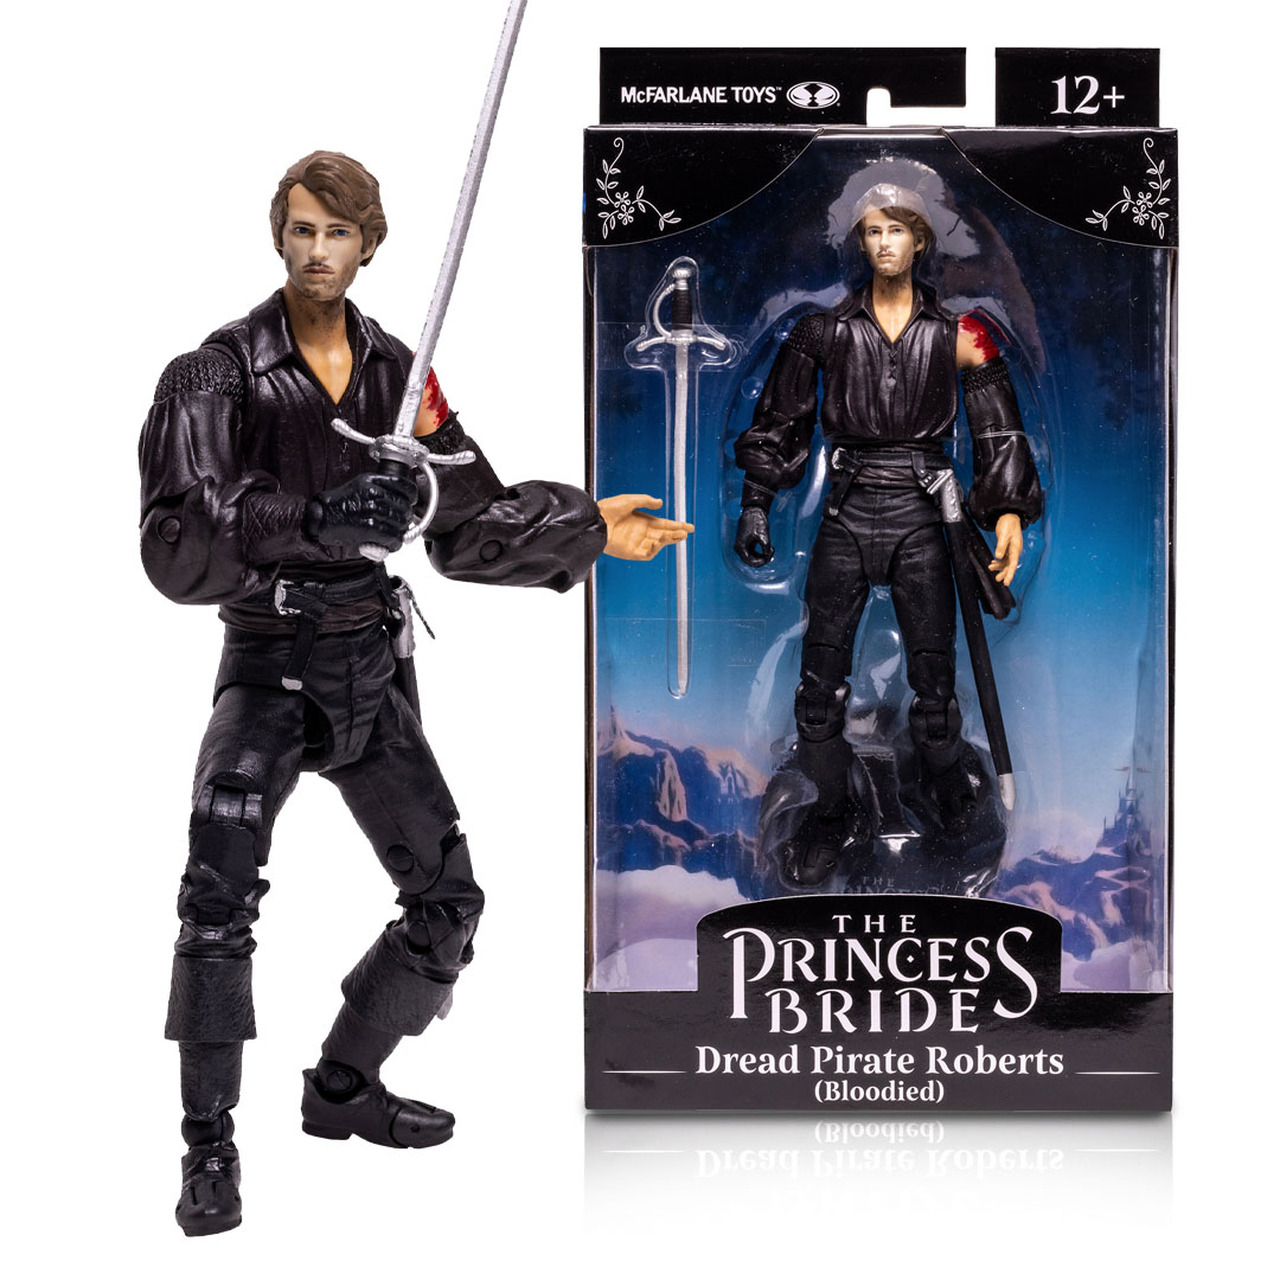 The Princess Bride - Bloodied Dread Pirate Roberts 7 Action Figure (McFarlane Toys)